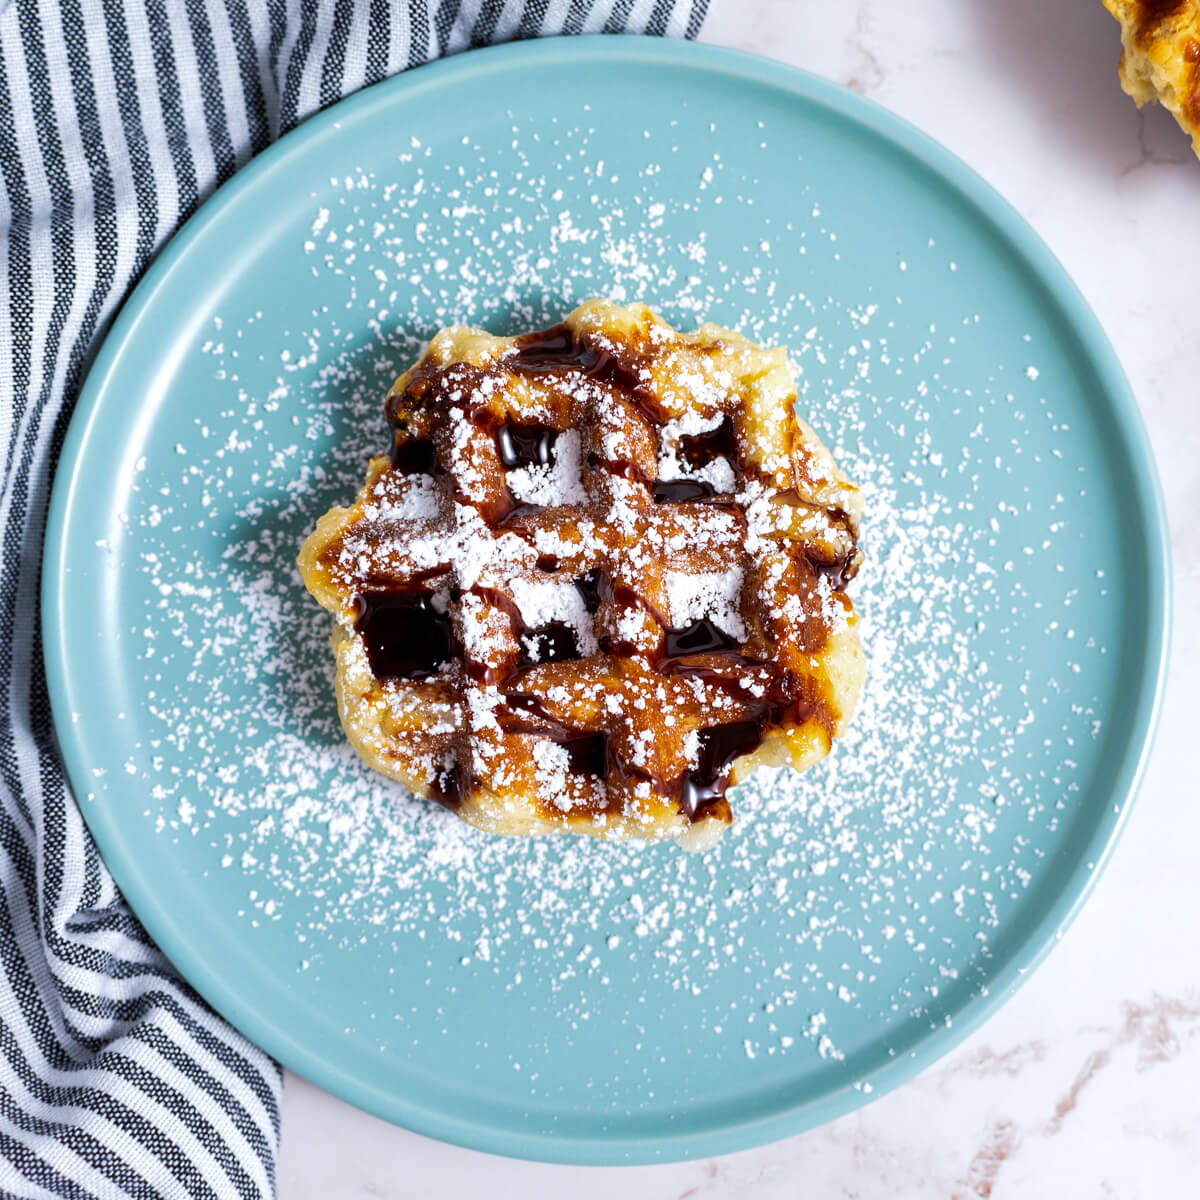 One Belgian Liège Waffle with confectioners' sugar and chocolate sauce sitting on a blue plate.